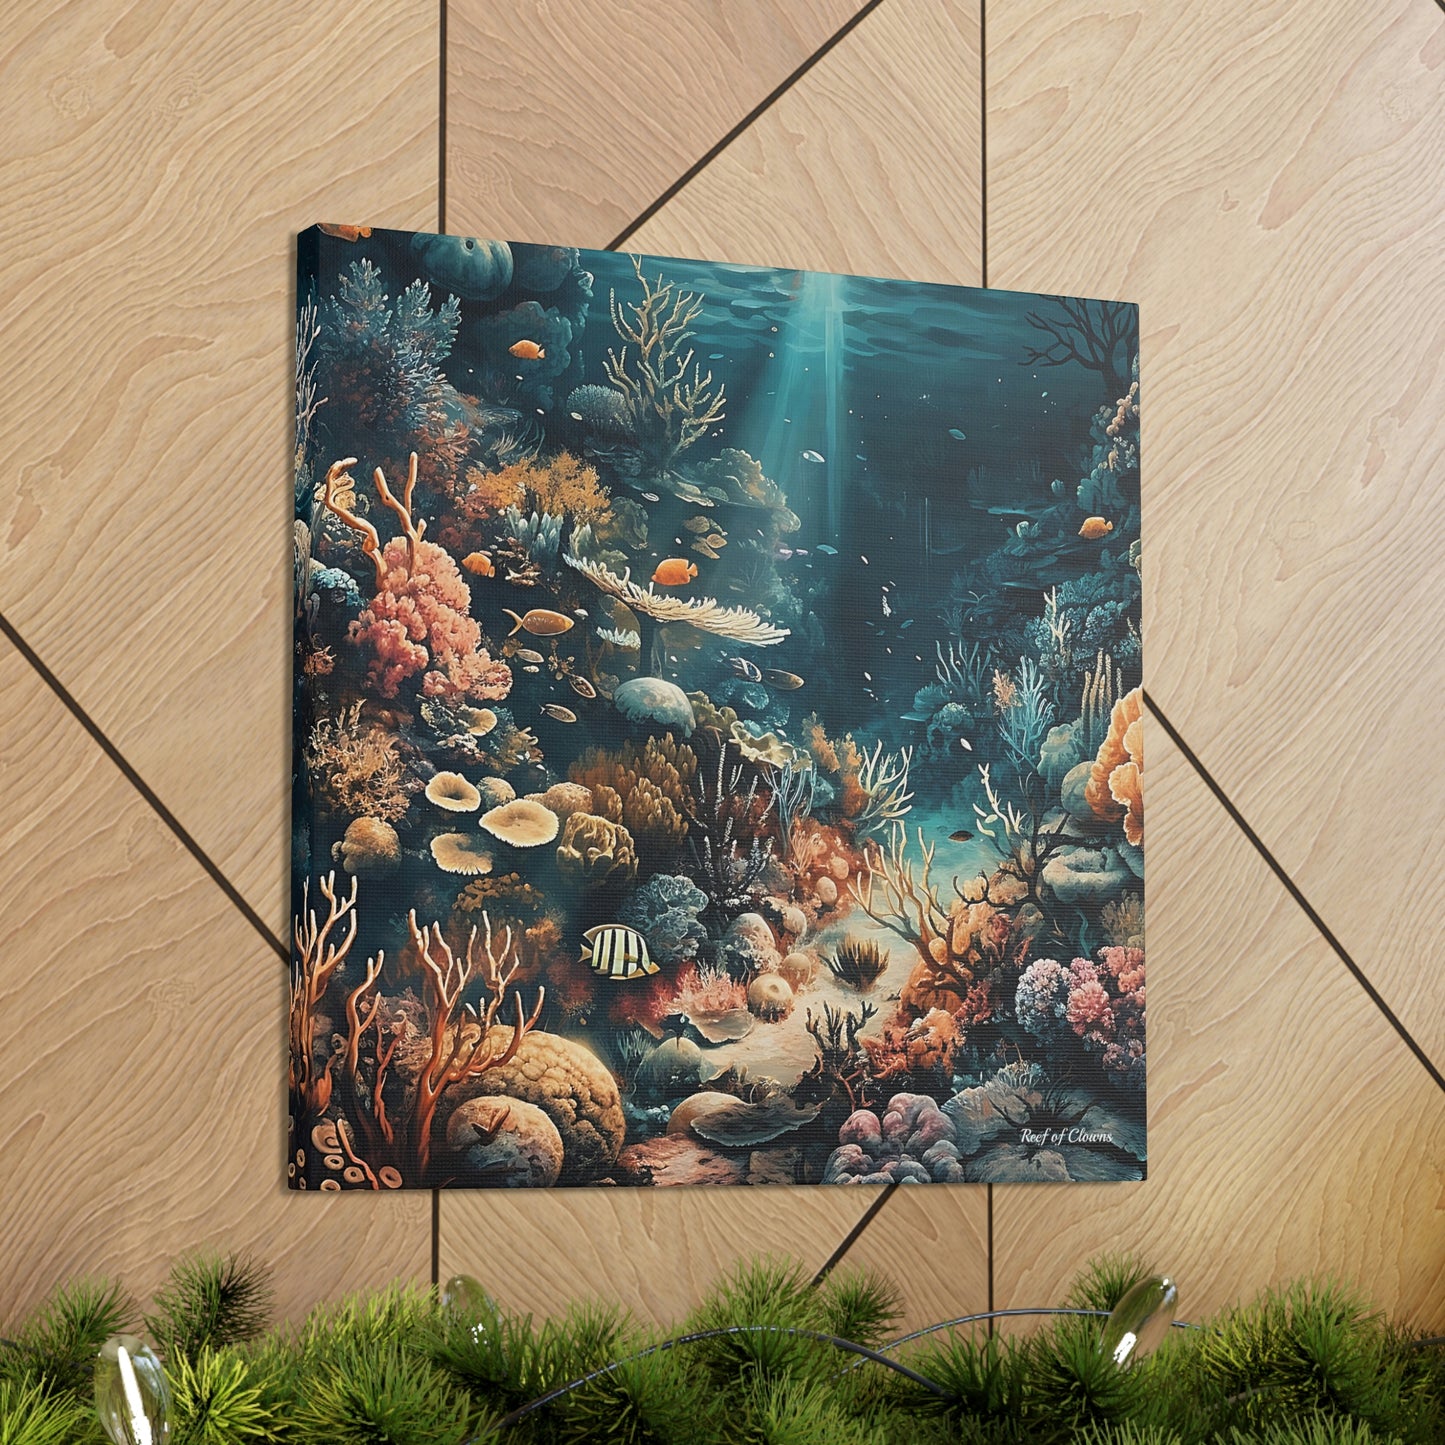 Coral Reef Evening (Canvas Art) - Reef of Clowns